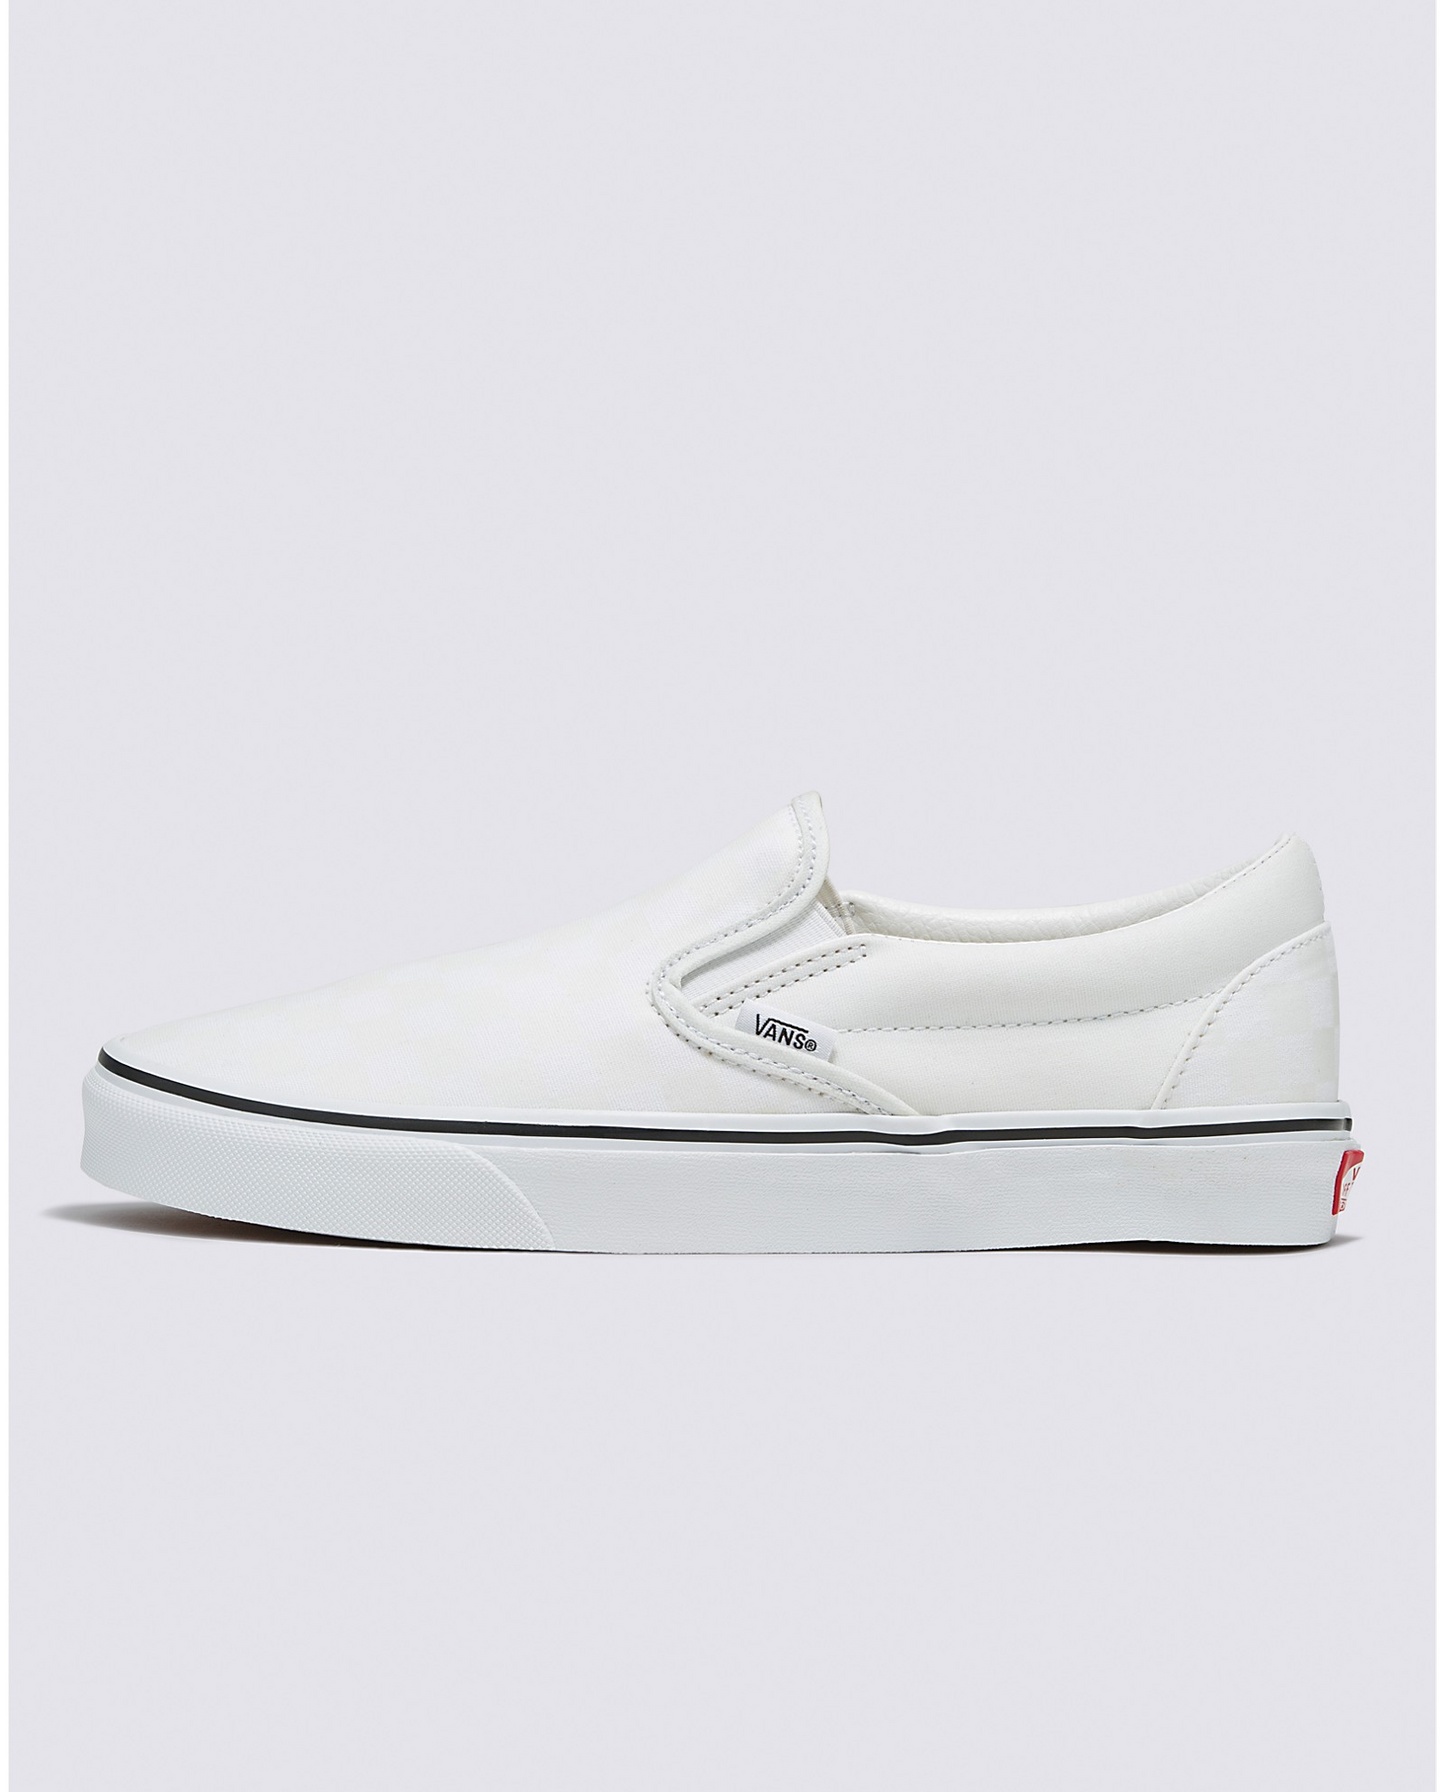 Vans Classic Slip-On Color Theory Checkerboard Glow Shoes